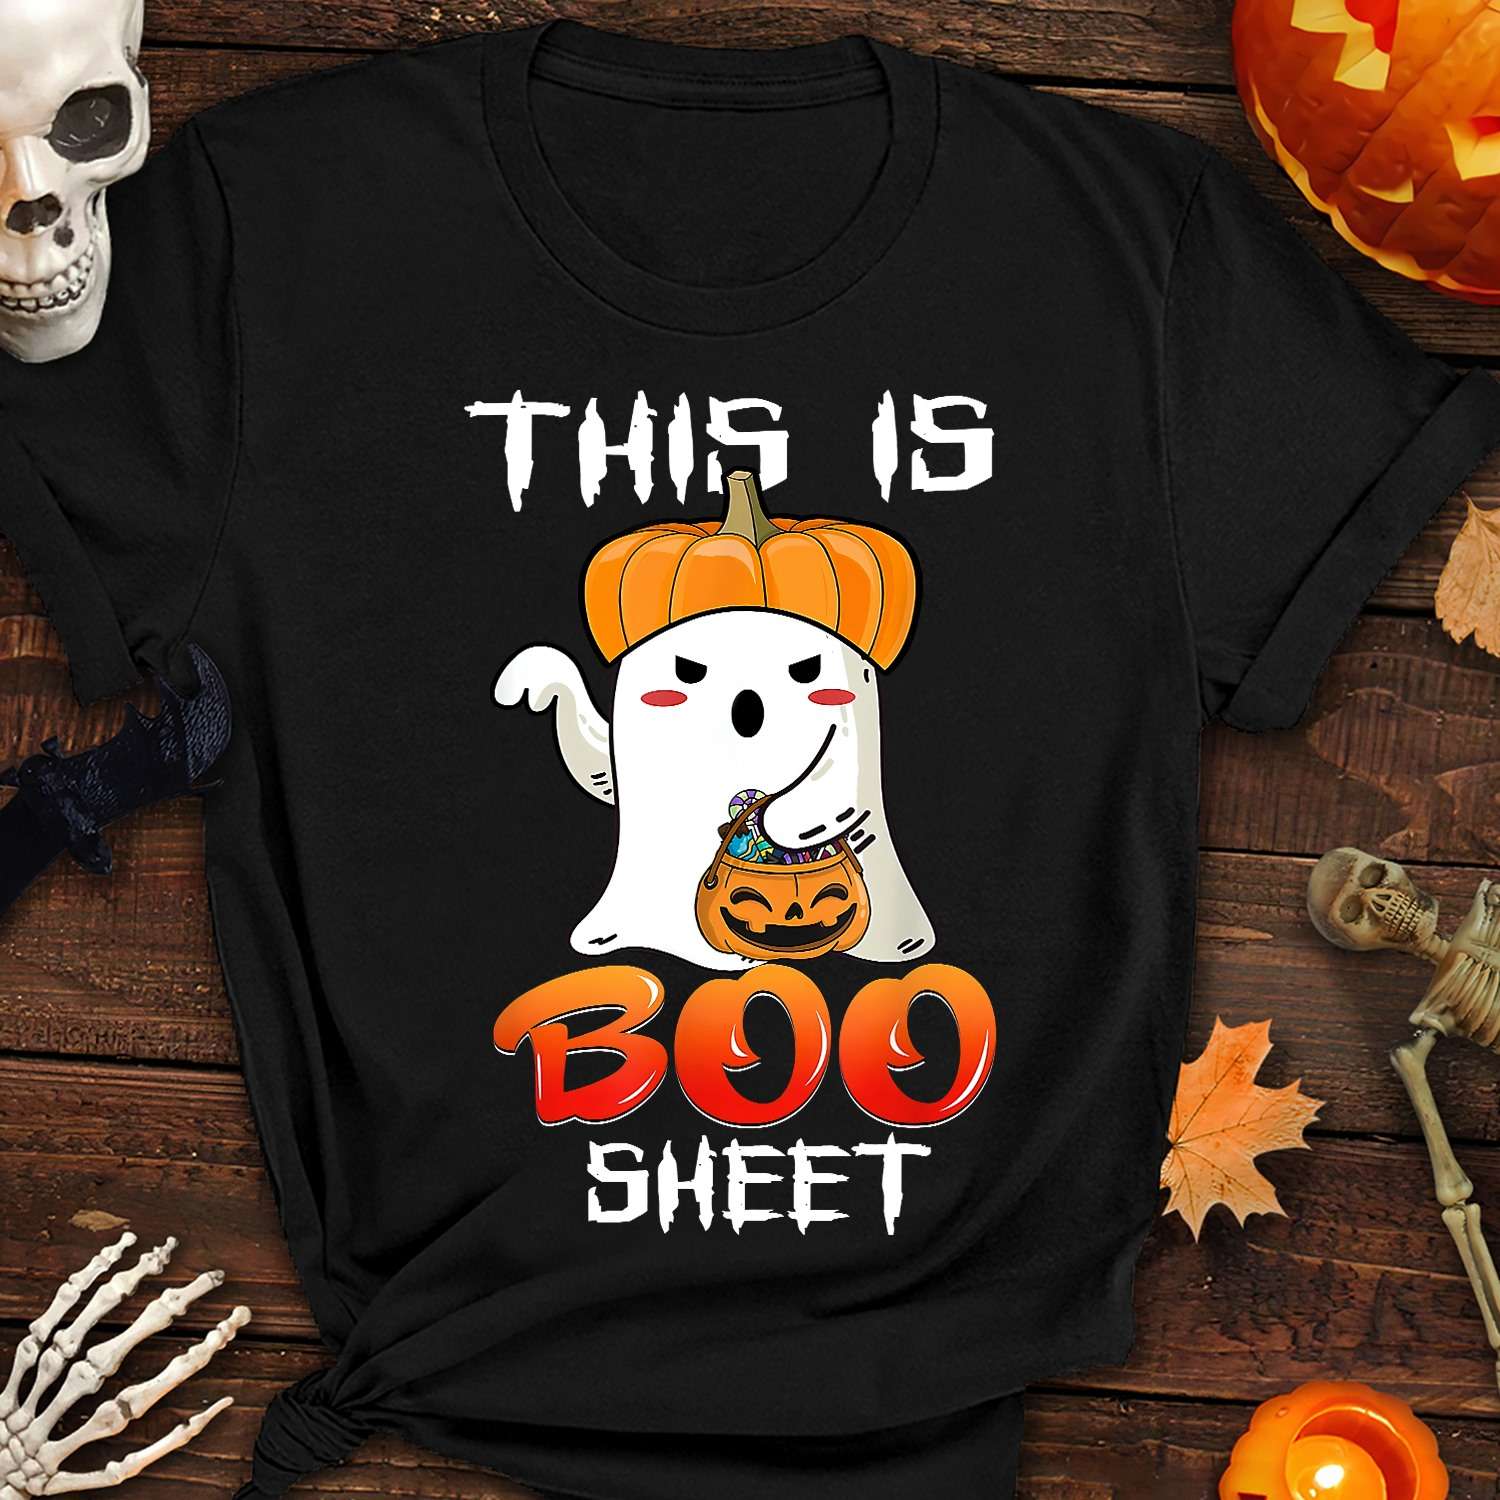 Boo Halloween, Trick Or Treat - This is boo sheet